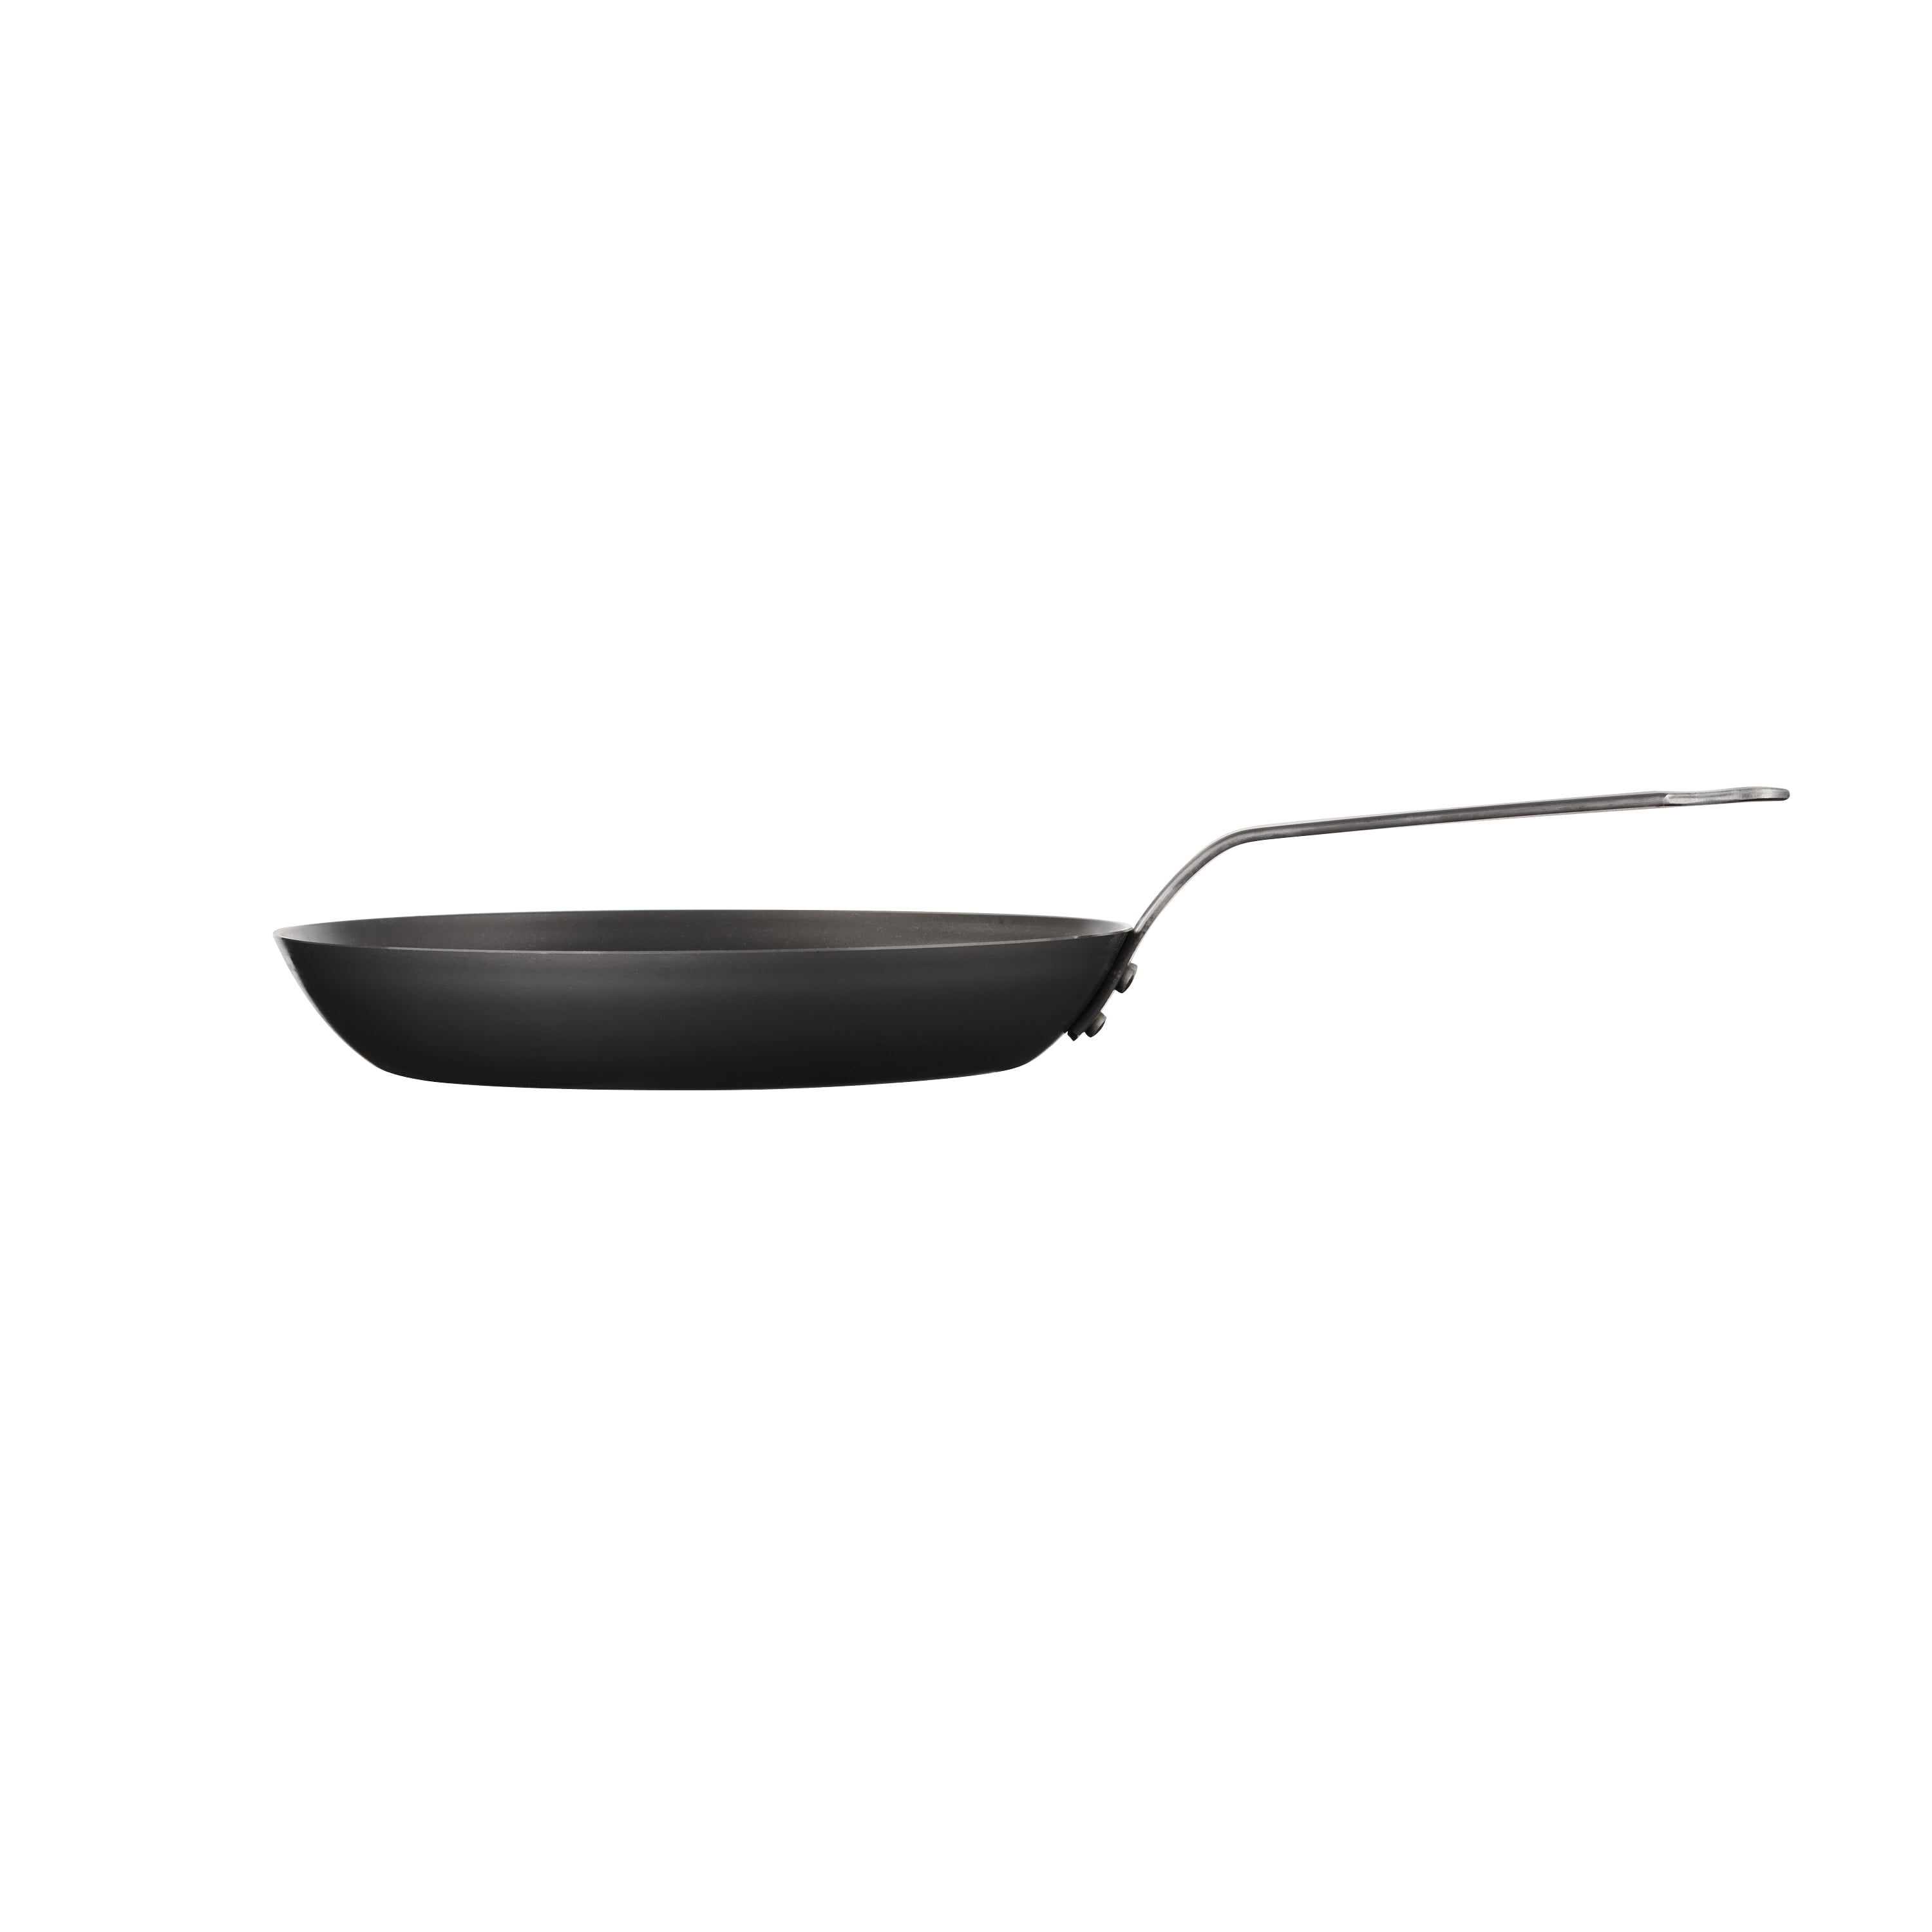 Tramontina 12 in Carbon Steel Fry Pan – with Silicone Grip, 12 Inch, Black